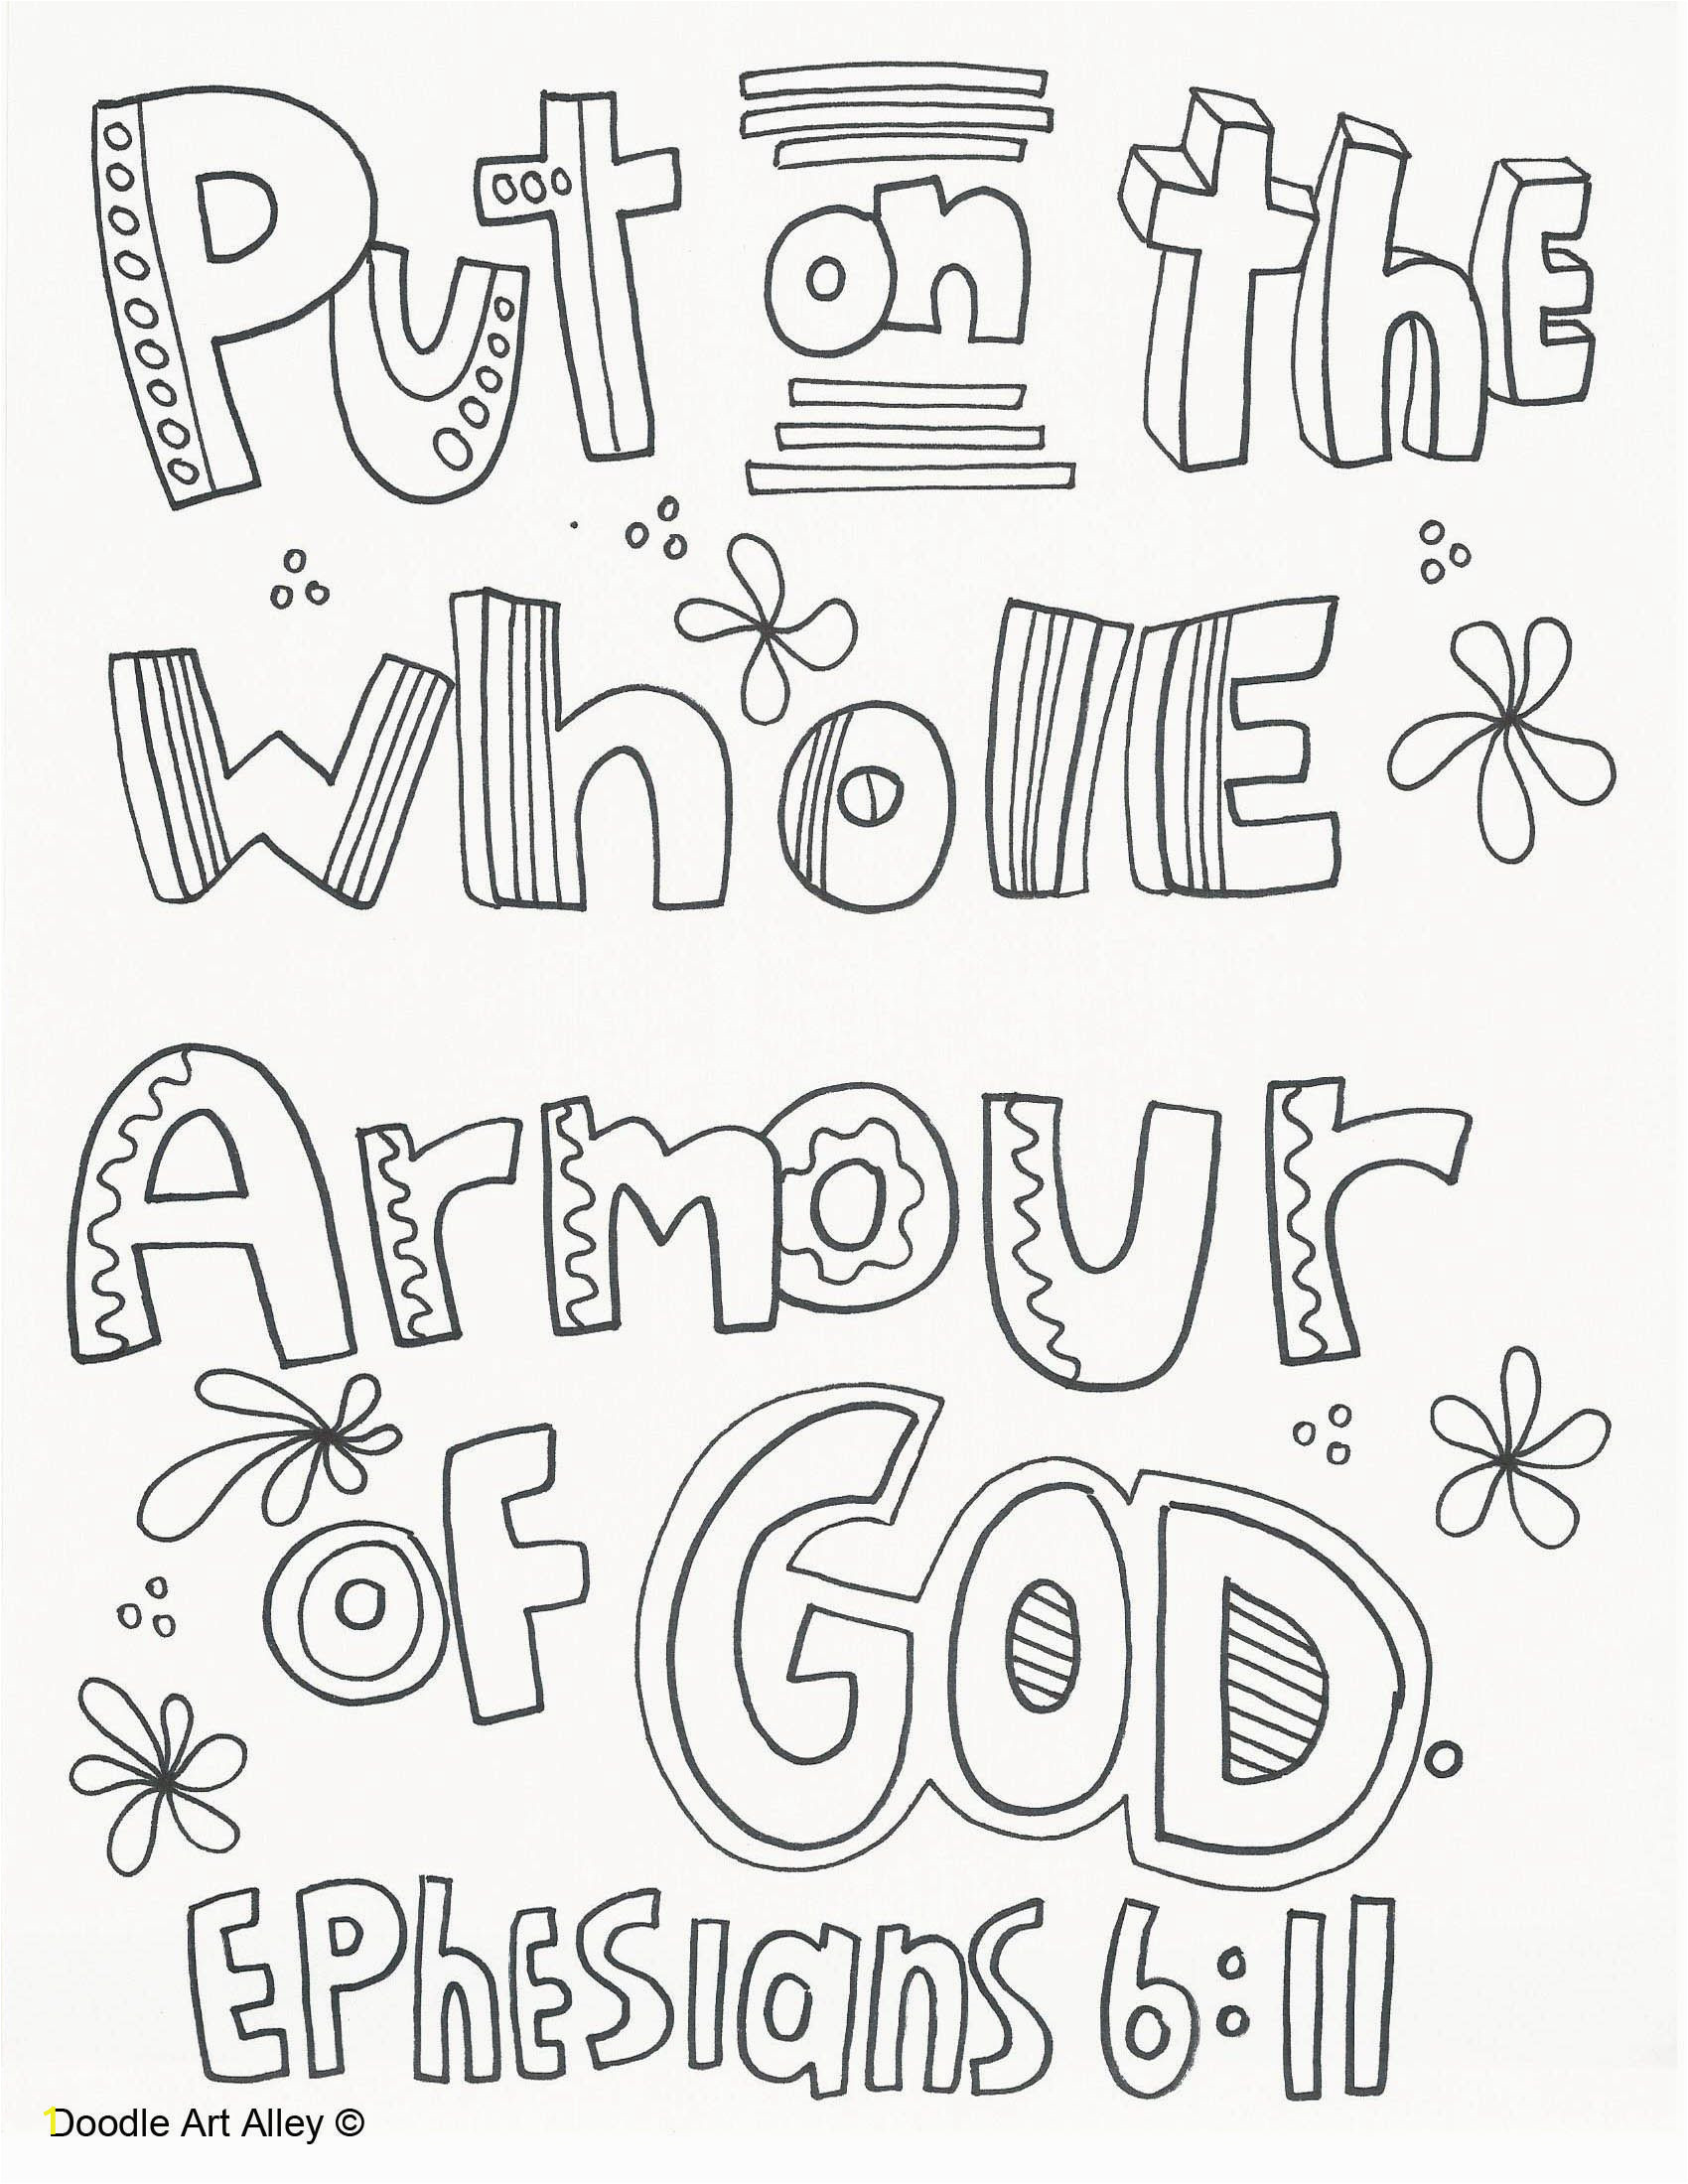 Whole Armour Of God Coloring Pages Armour God Drawing at Getdrawings